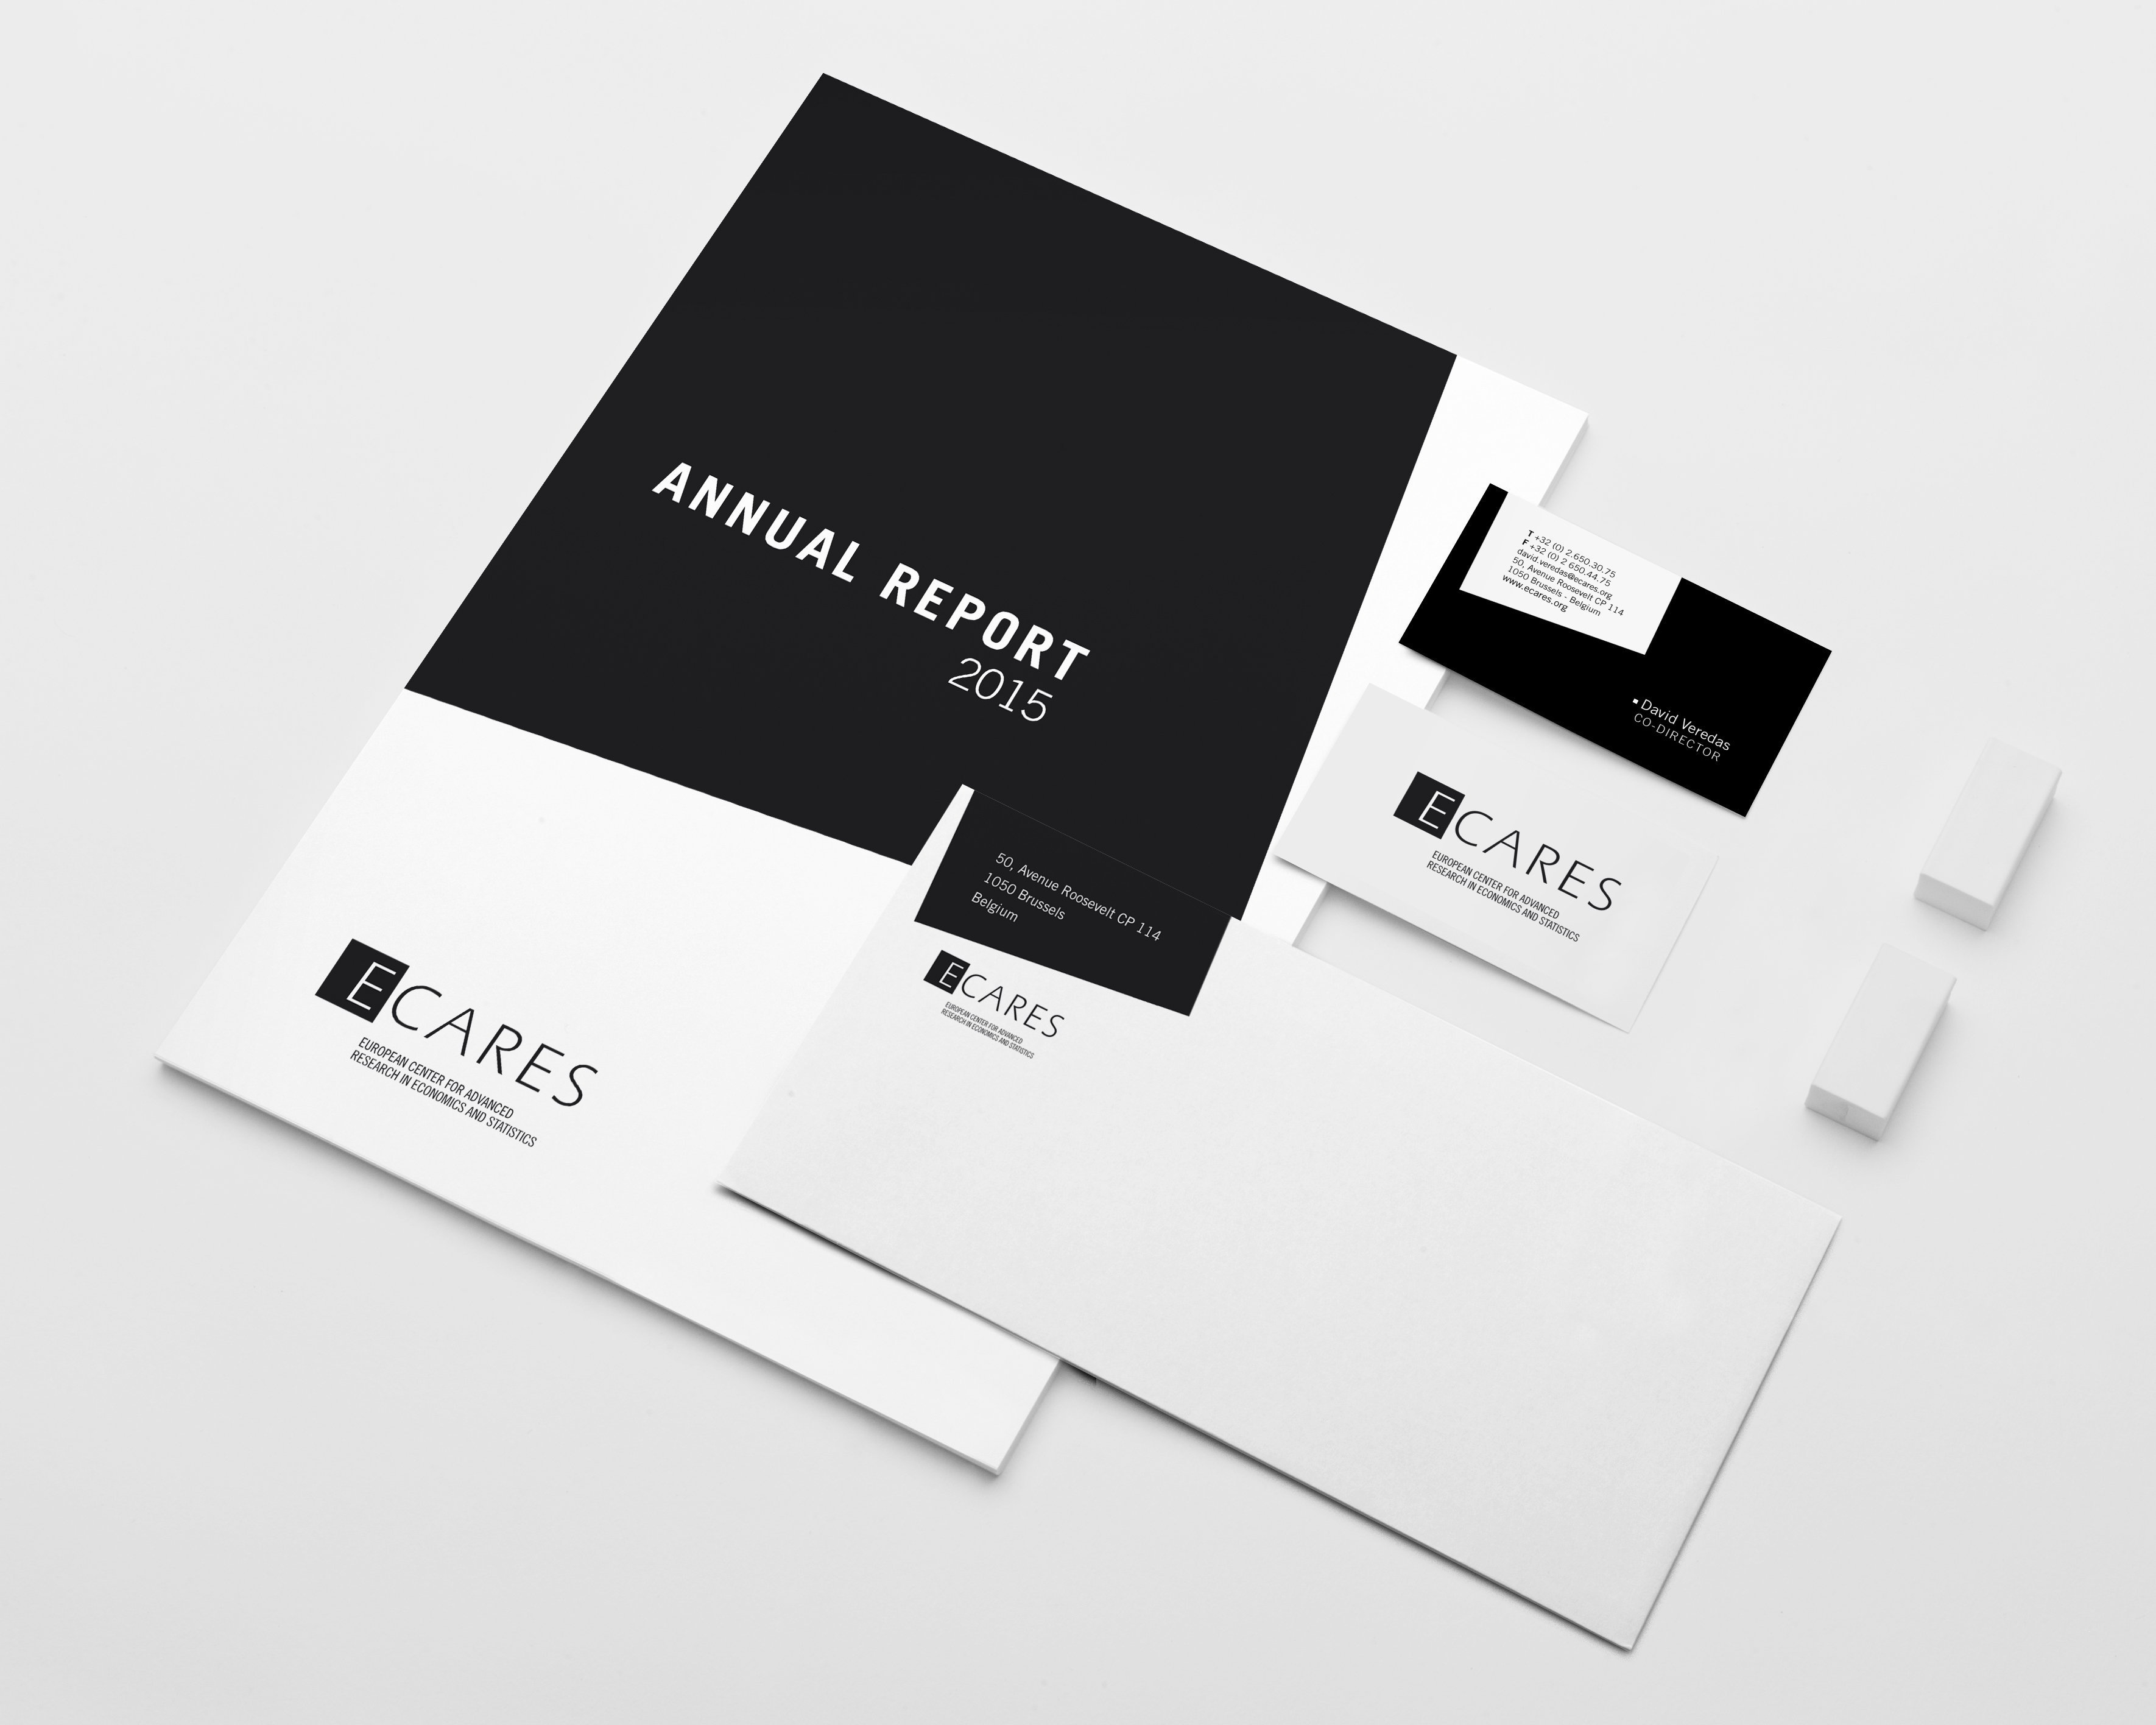 Stationery Mockup Template - ECARES